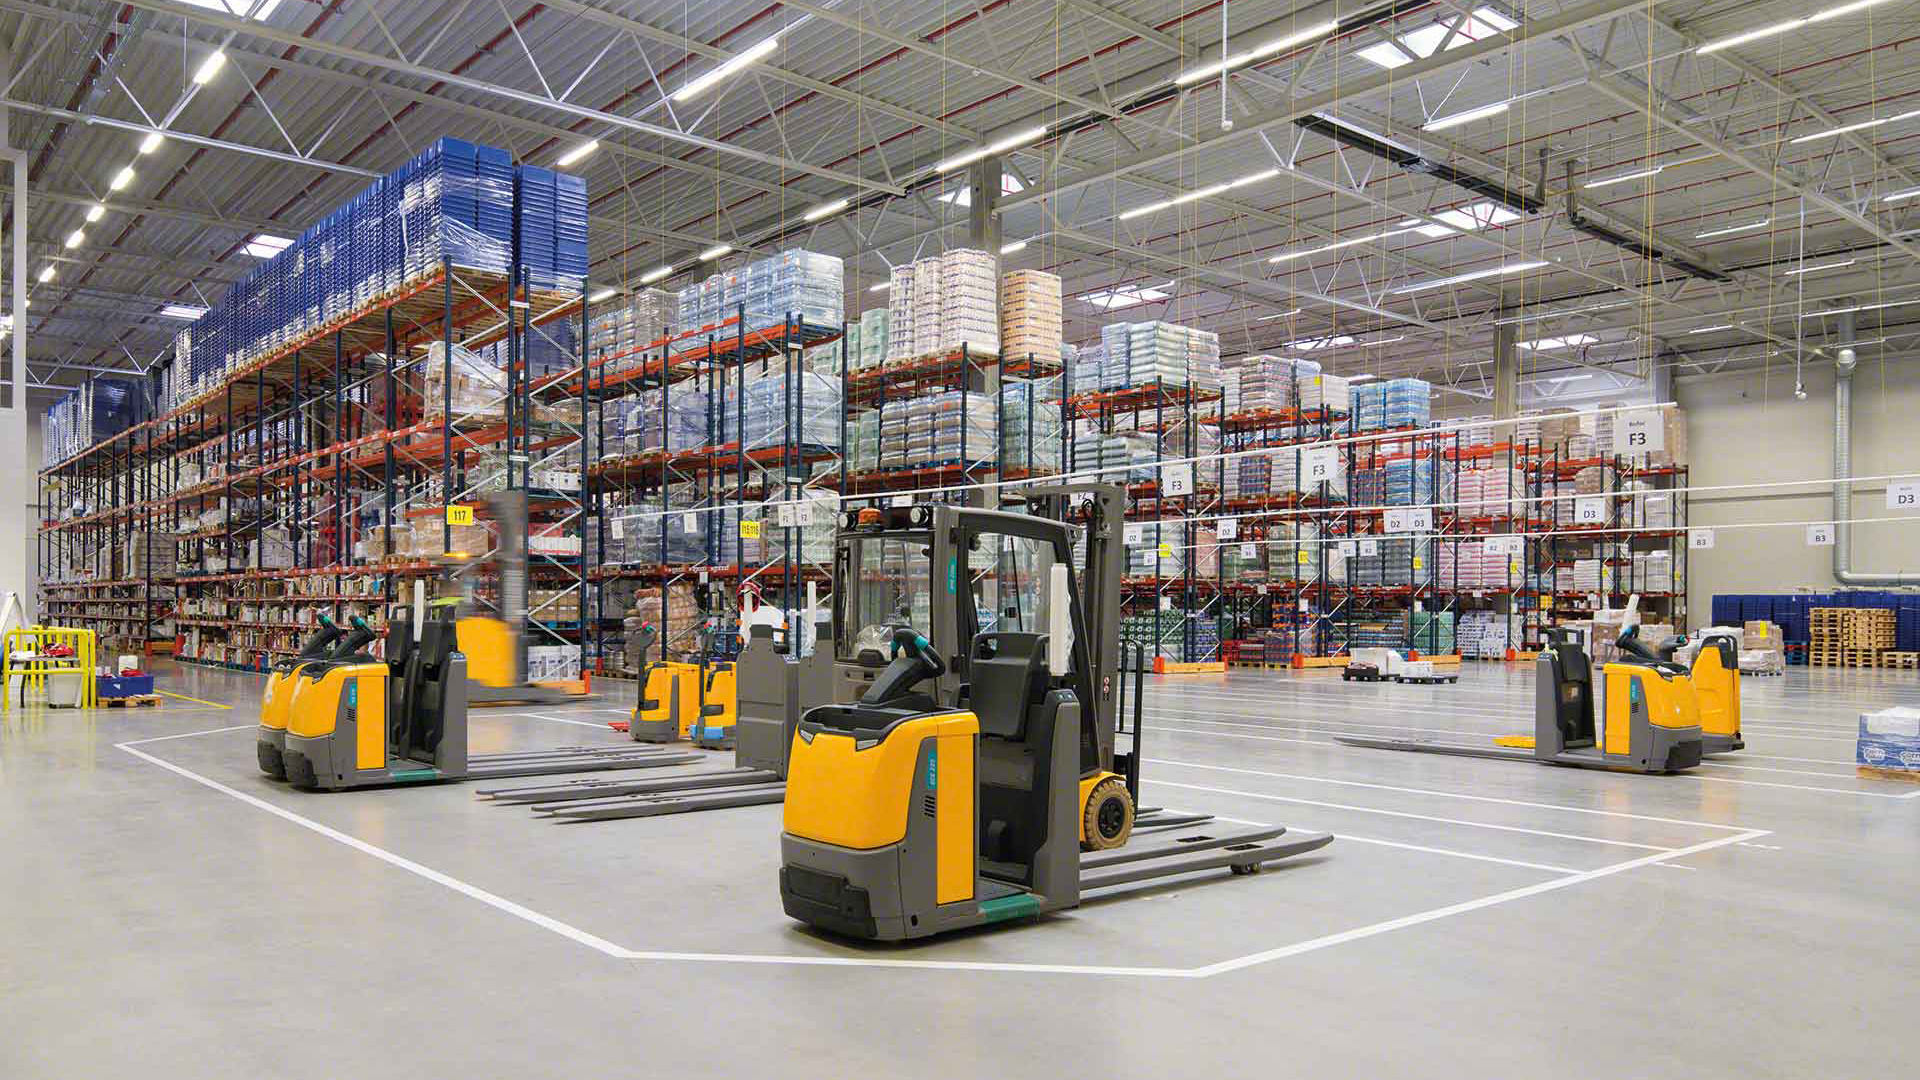 What Should You Look for When Choosing a Material Handling Provider?